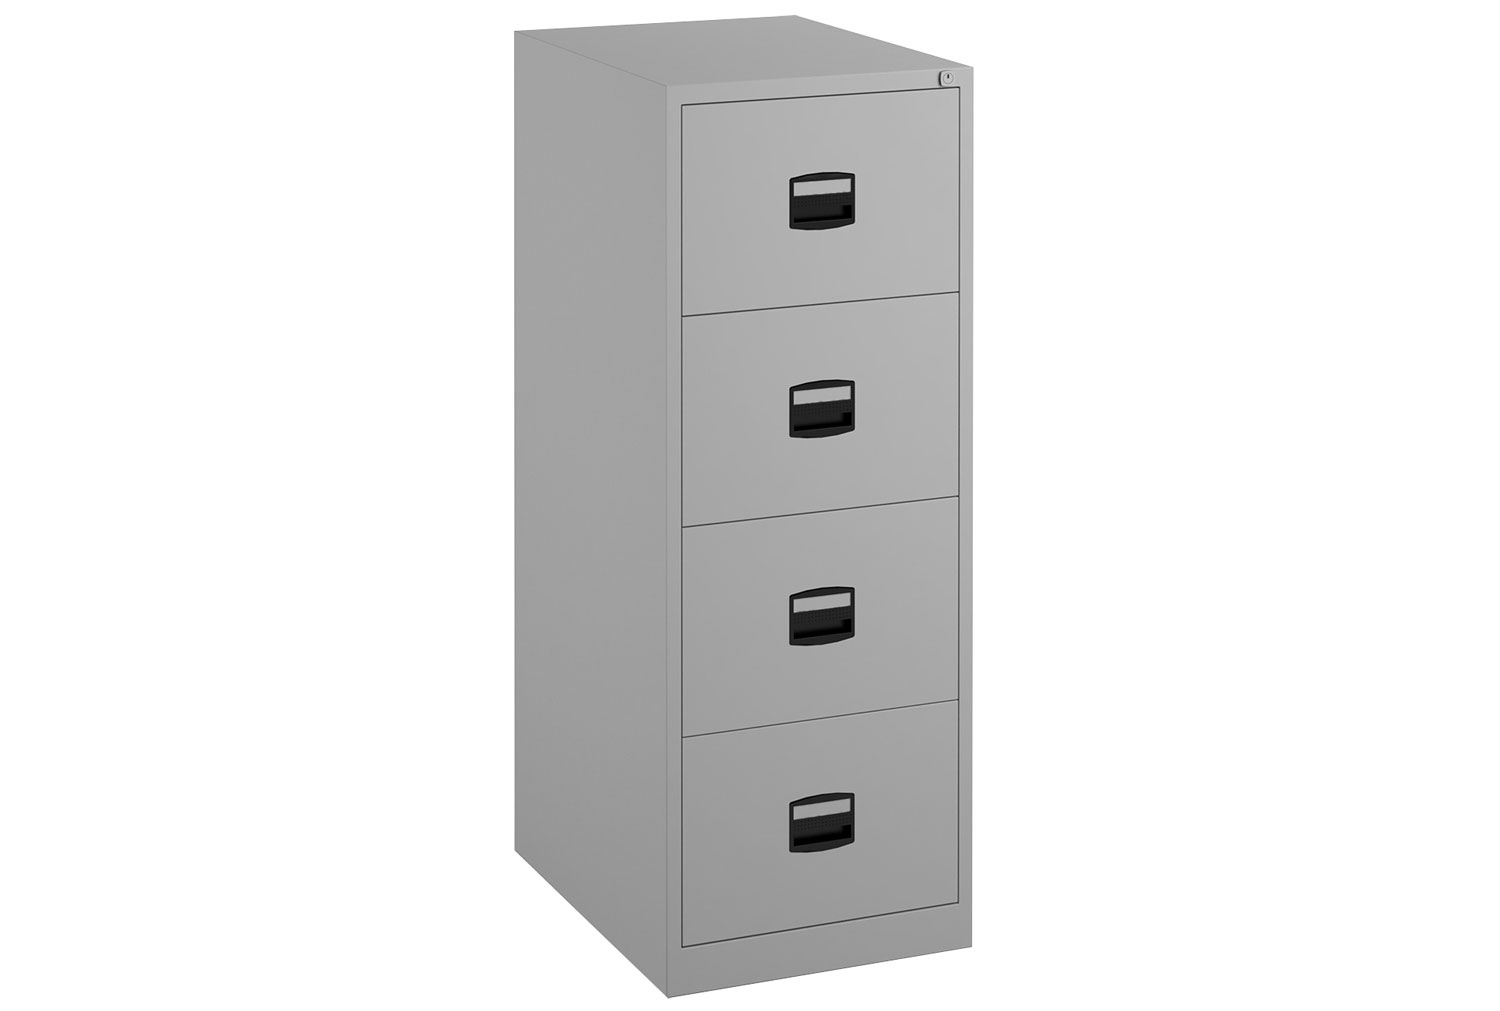 Bisley Economy Filing Cabinet (Central Handle), 4 Drawer - 47wx62dx132h (cm), Grey, Express Delivery